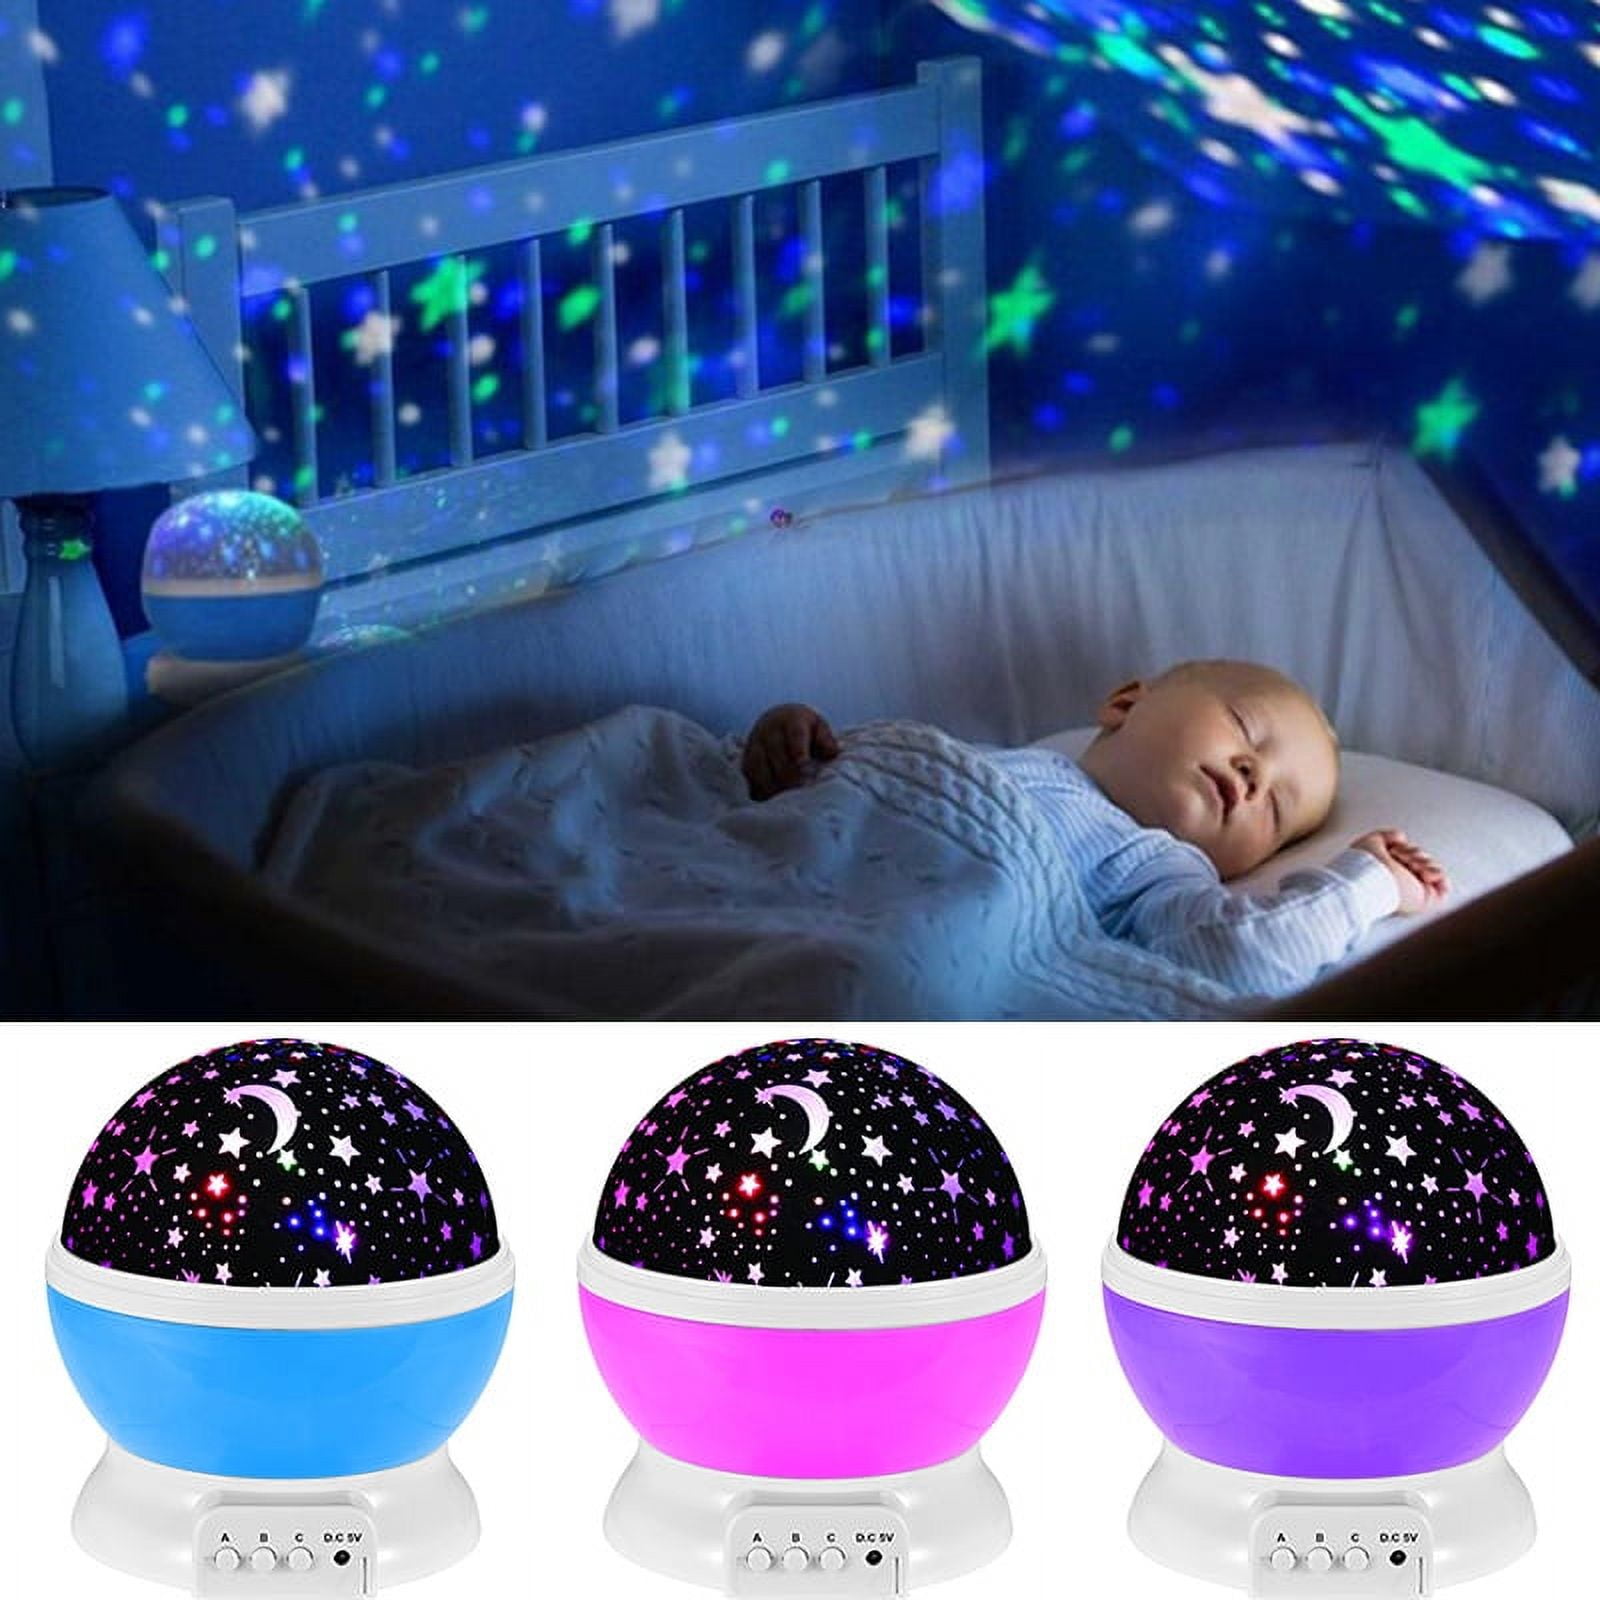 【Gifts Package】 Christmas Gifts Star Projector Night Light for Kids, 96  Lighting Star Room Lights for Bedroom Decor,6 Films-360°Rotating Star